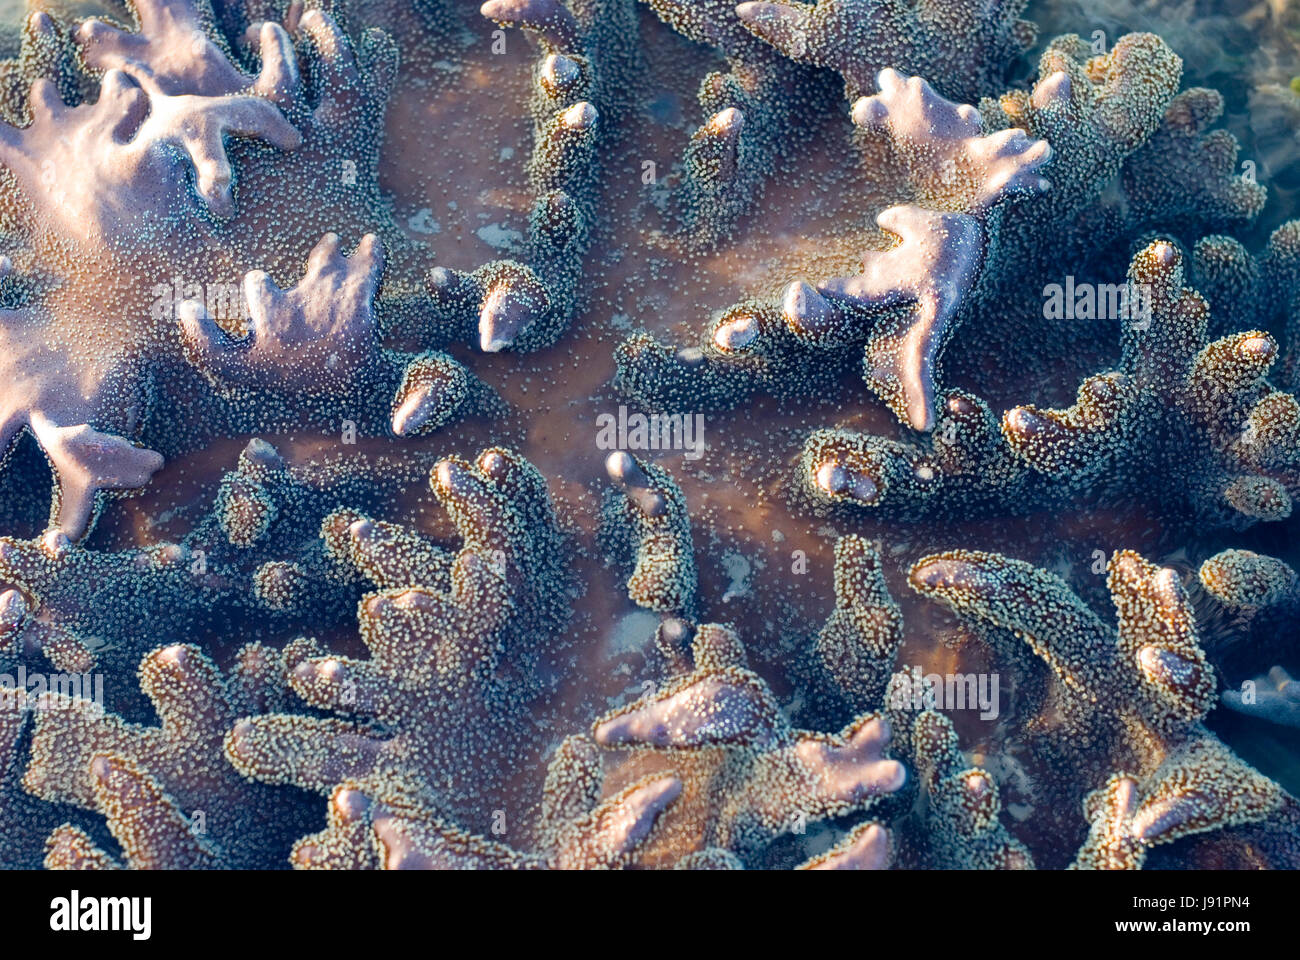 reef, corals, nature, coral, animal, purple, low tide, tides, tide, navy, Stock Photo